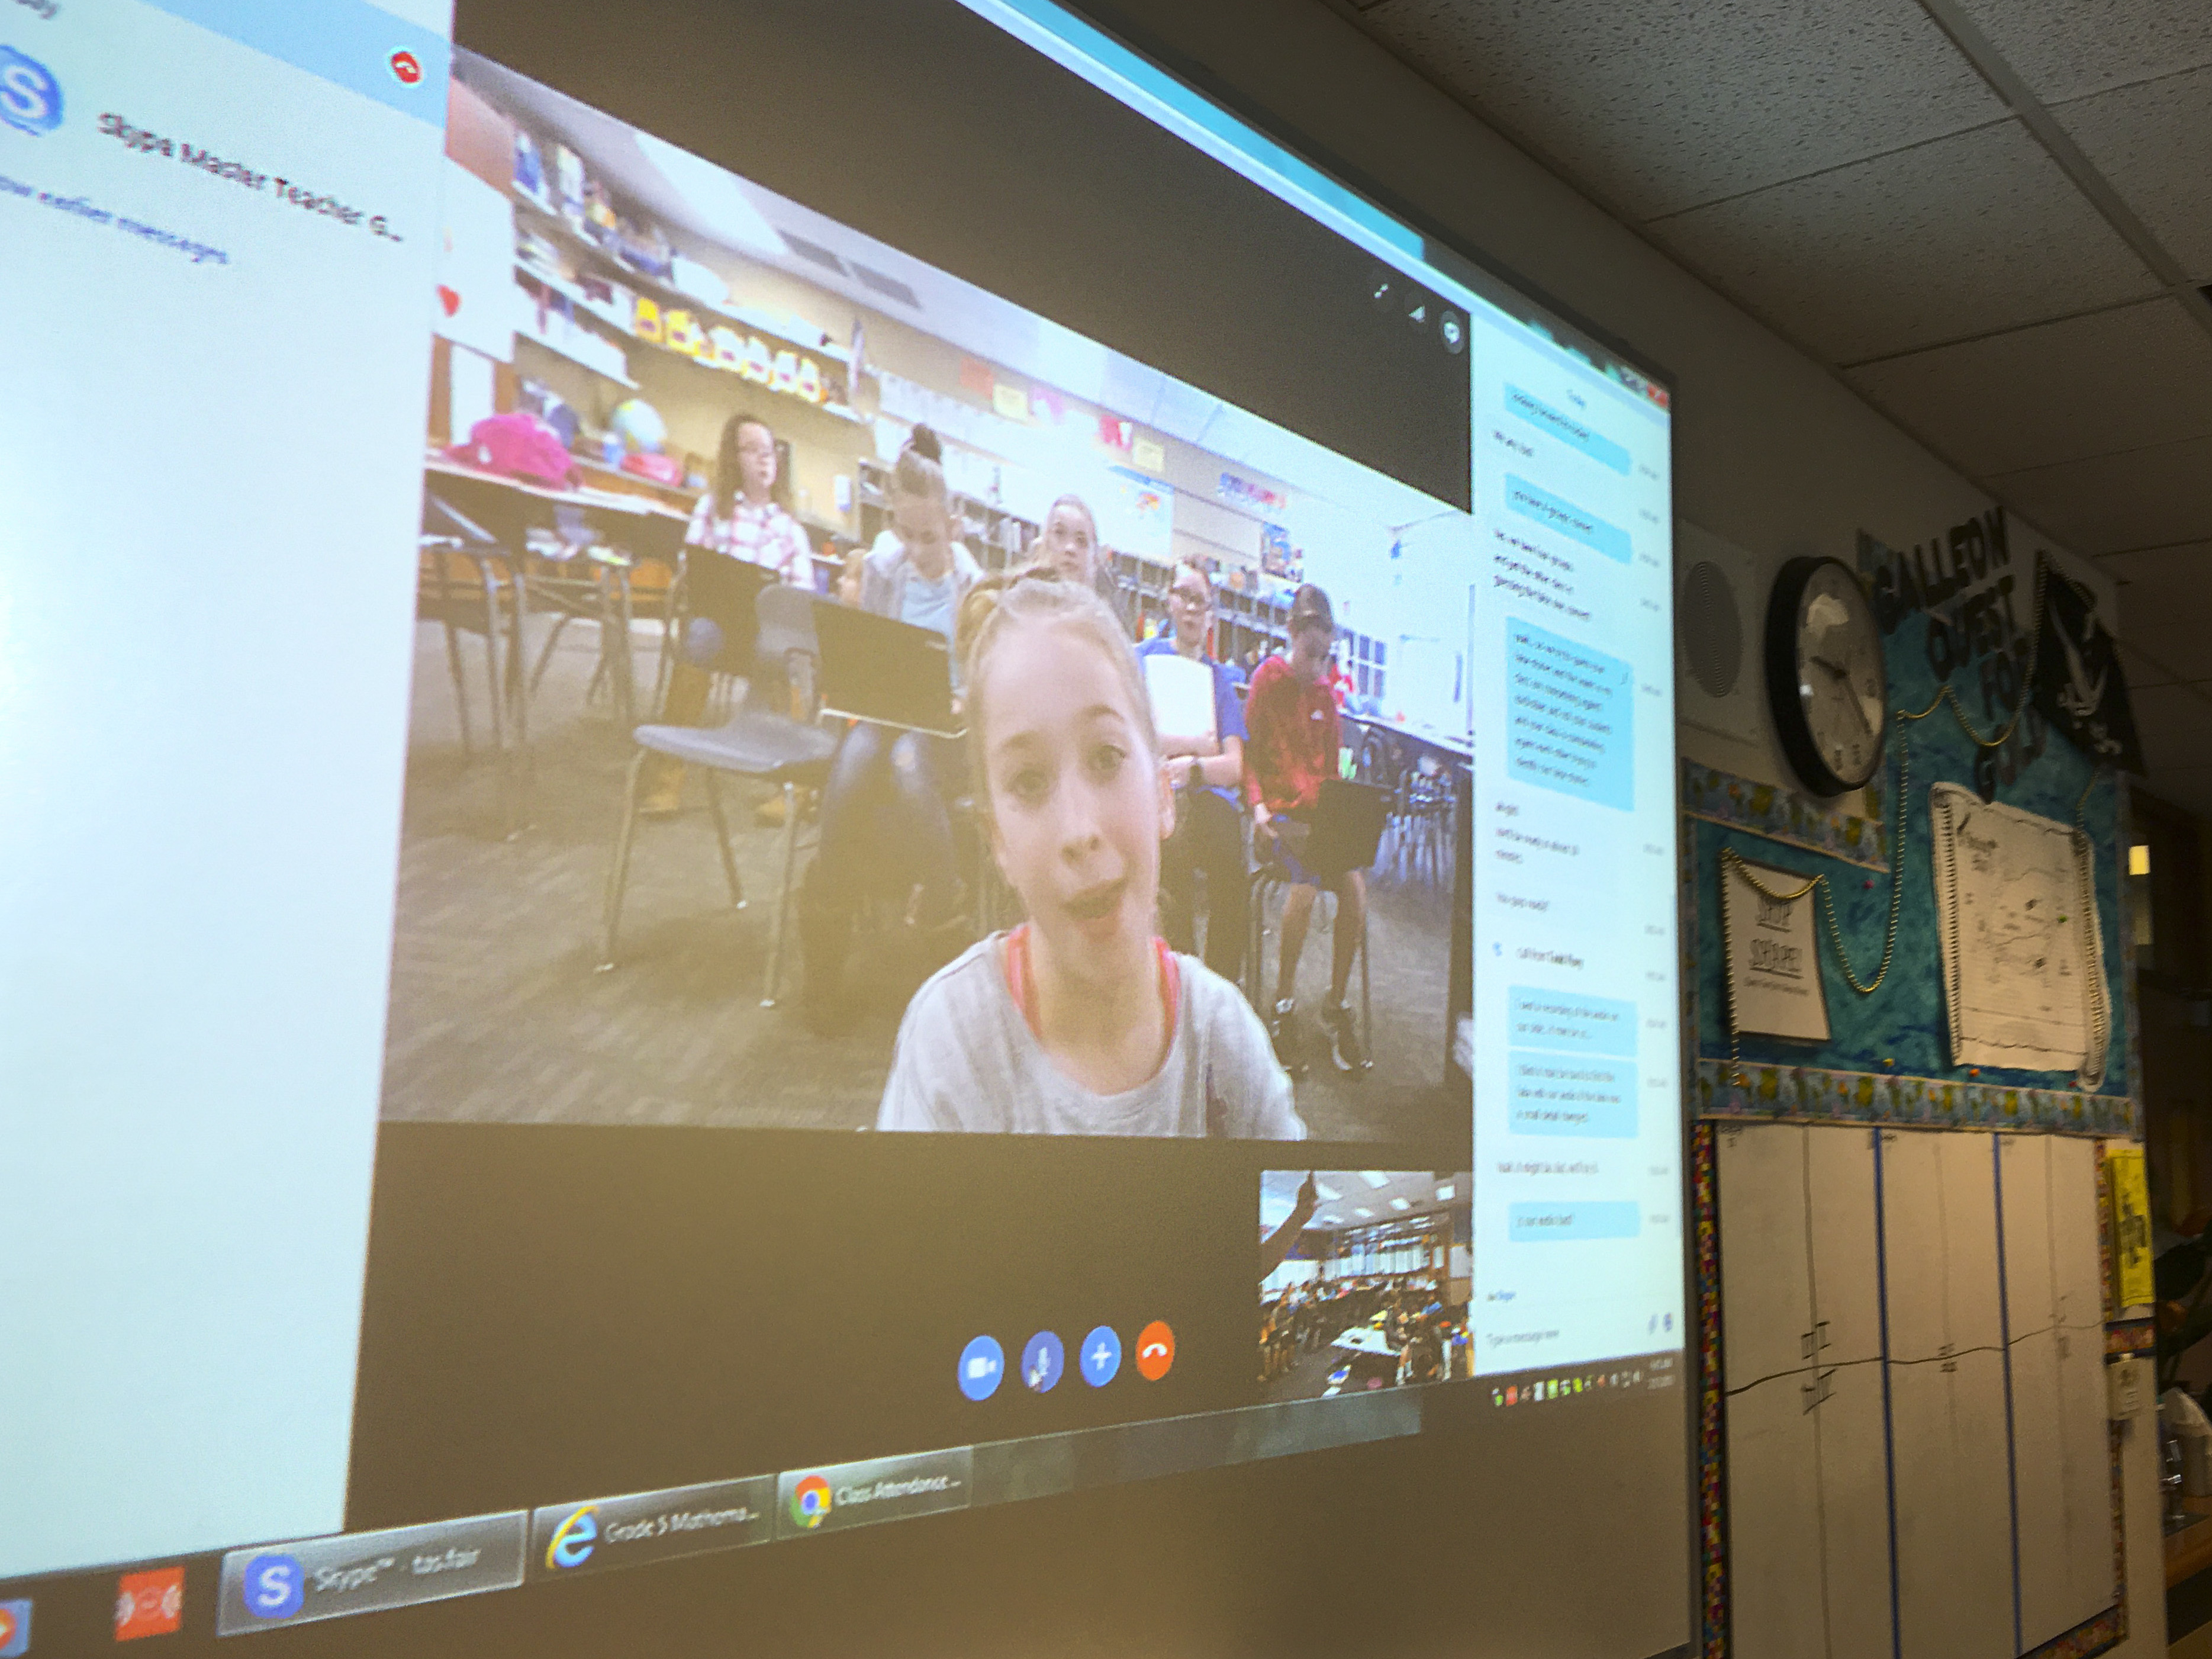 Bedley's class Skypes with Todd Flory's fourth-graders at Calamus Wheatland Elementary School in Calamus, Iowa.